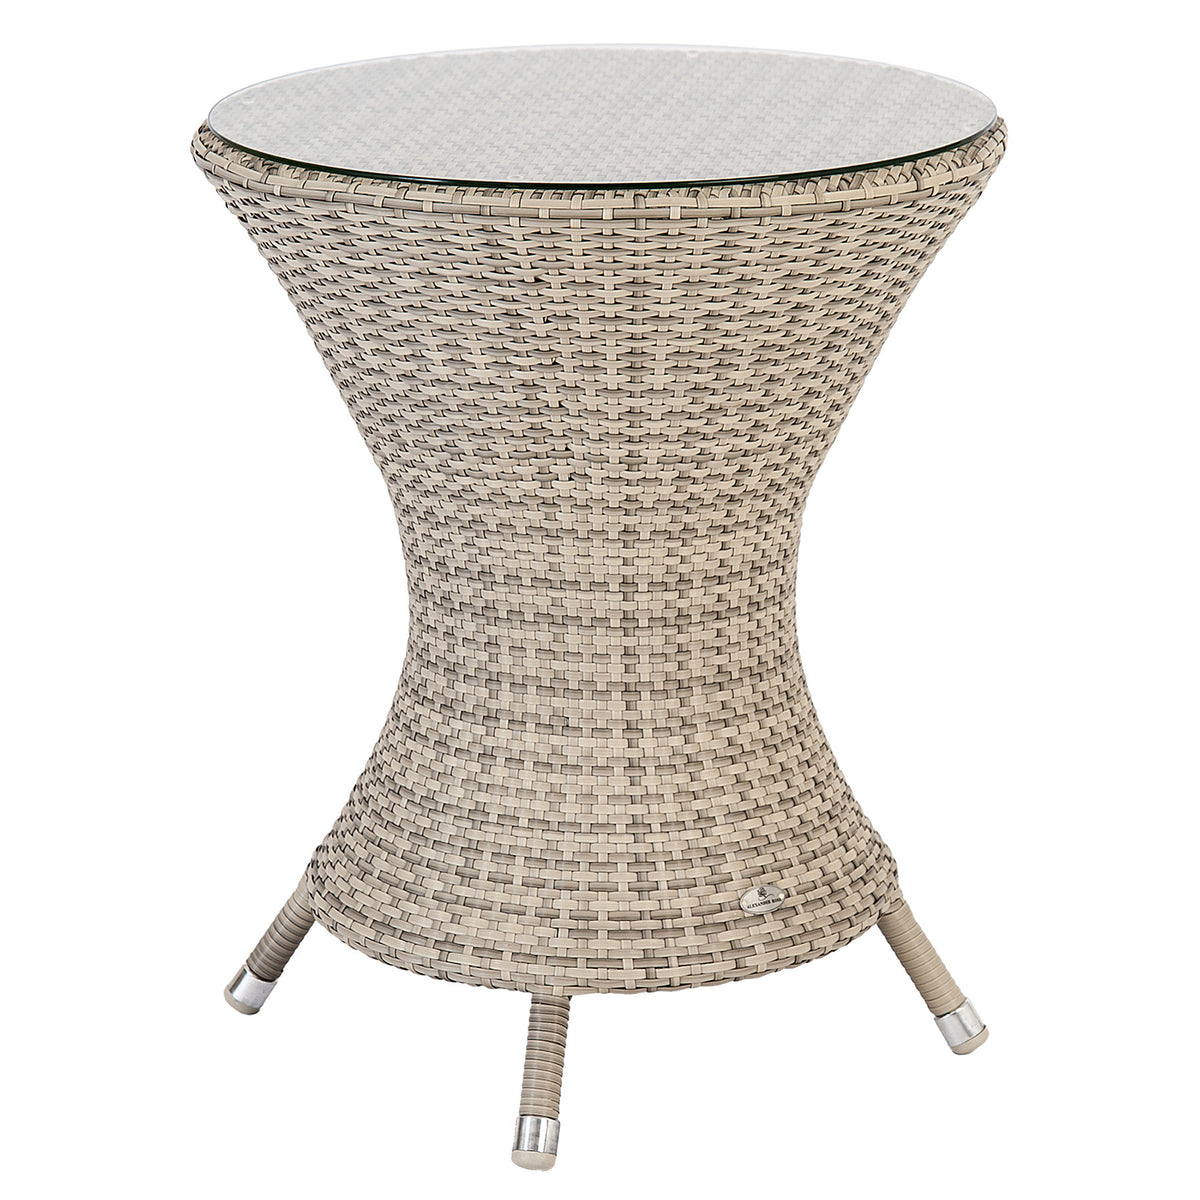 Alexander Rose Ocean Pearl Wave Bistro Table with Glass